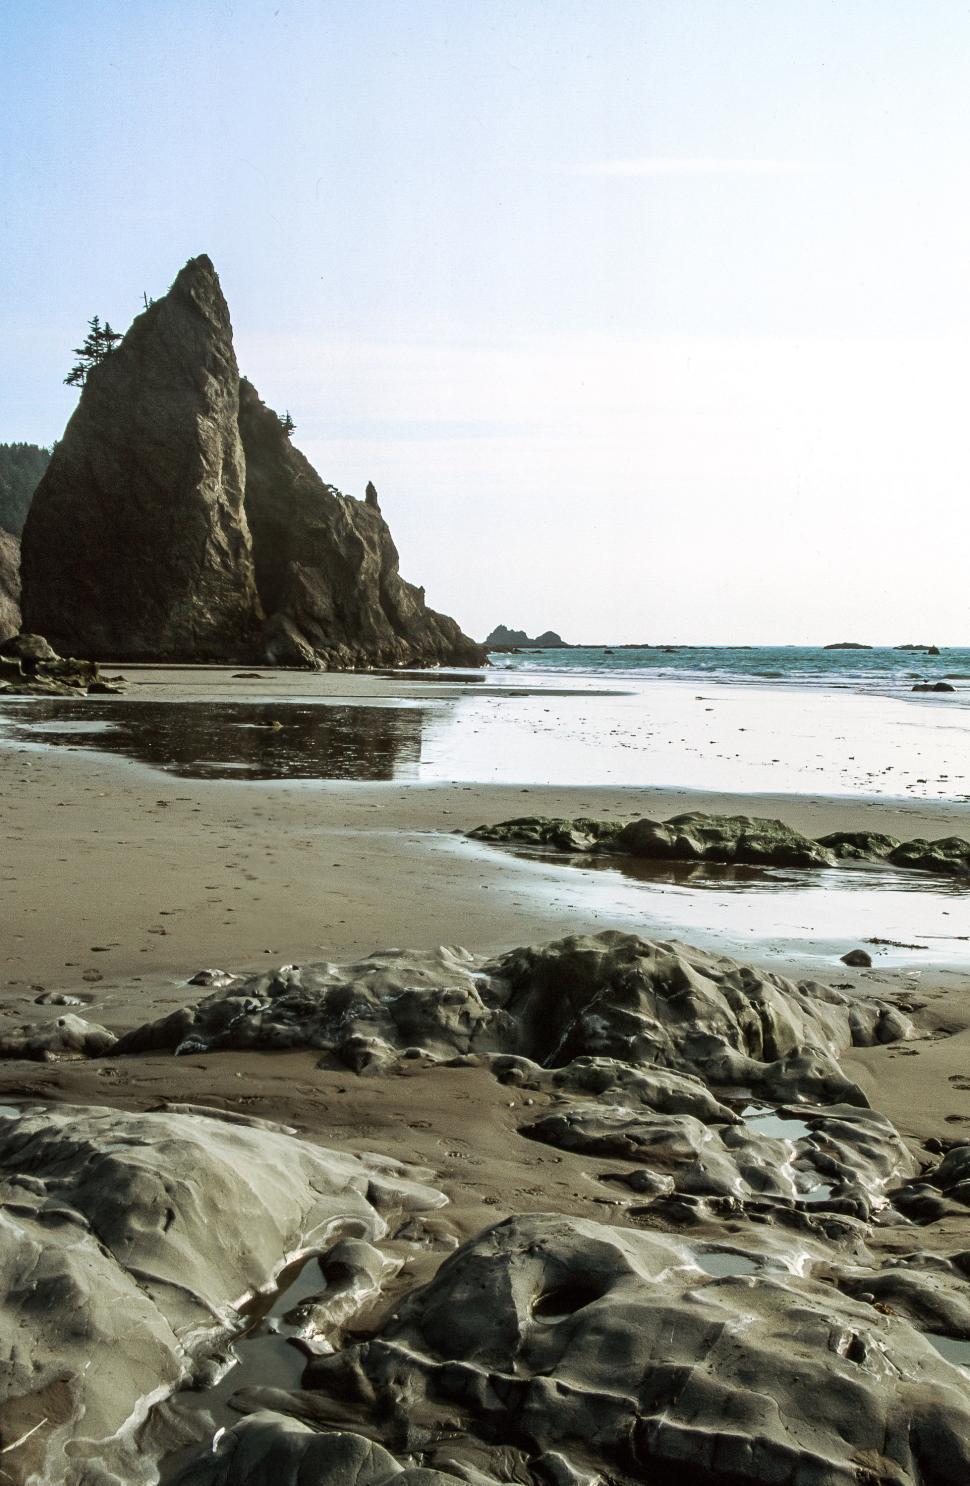 Free Image of Ruby Beach and Jagged Rock Formation 